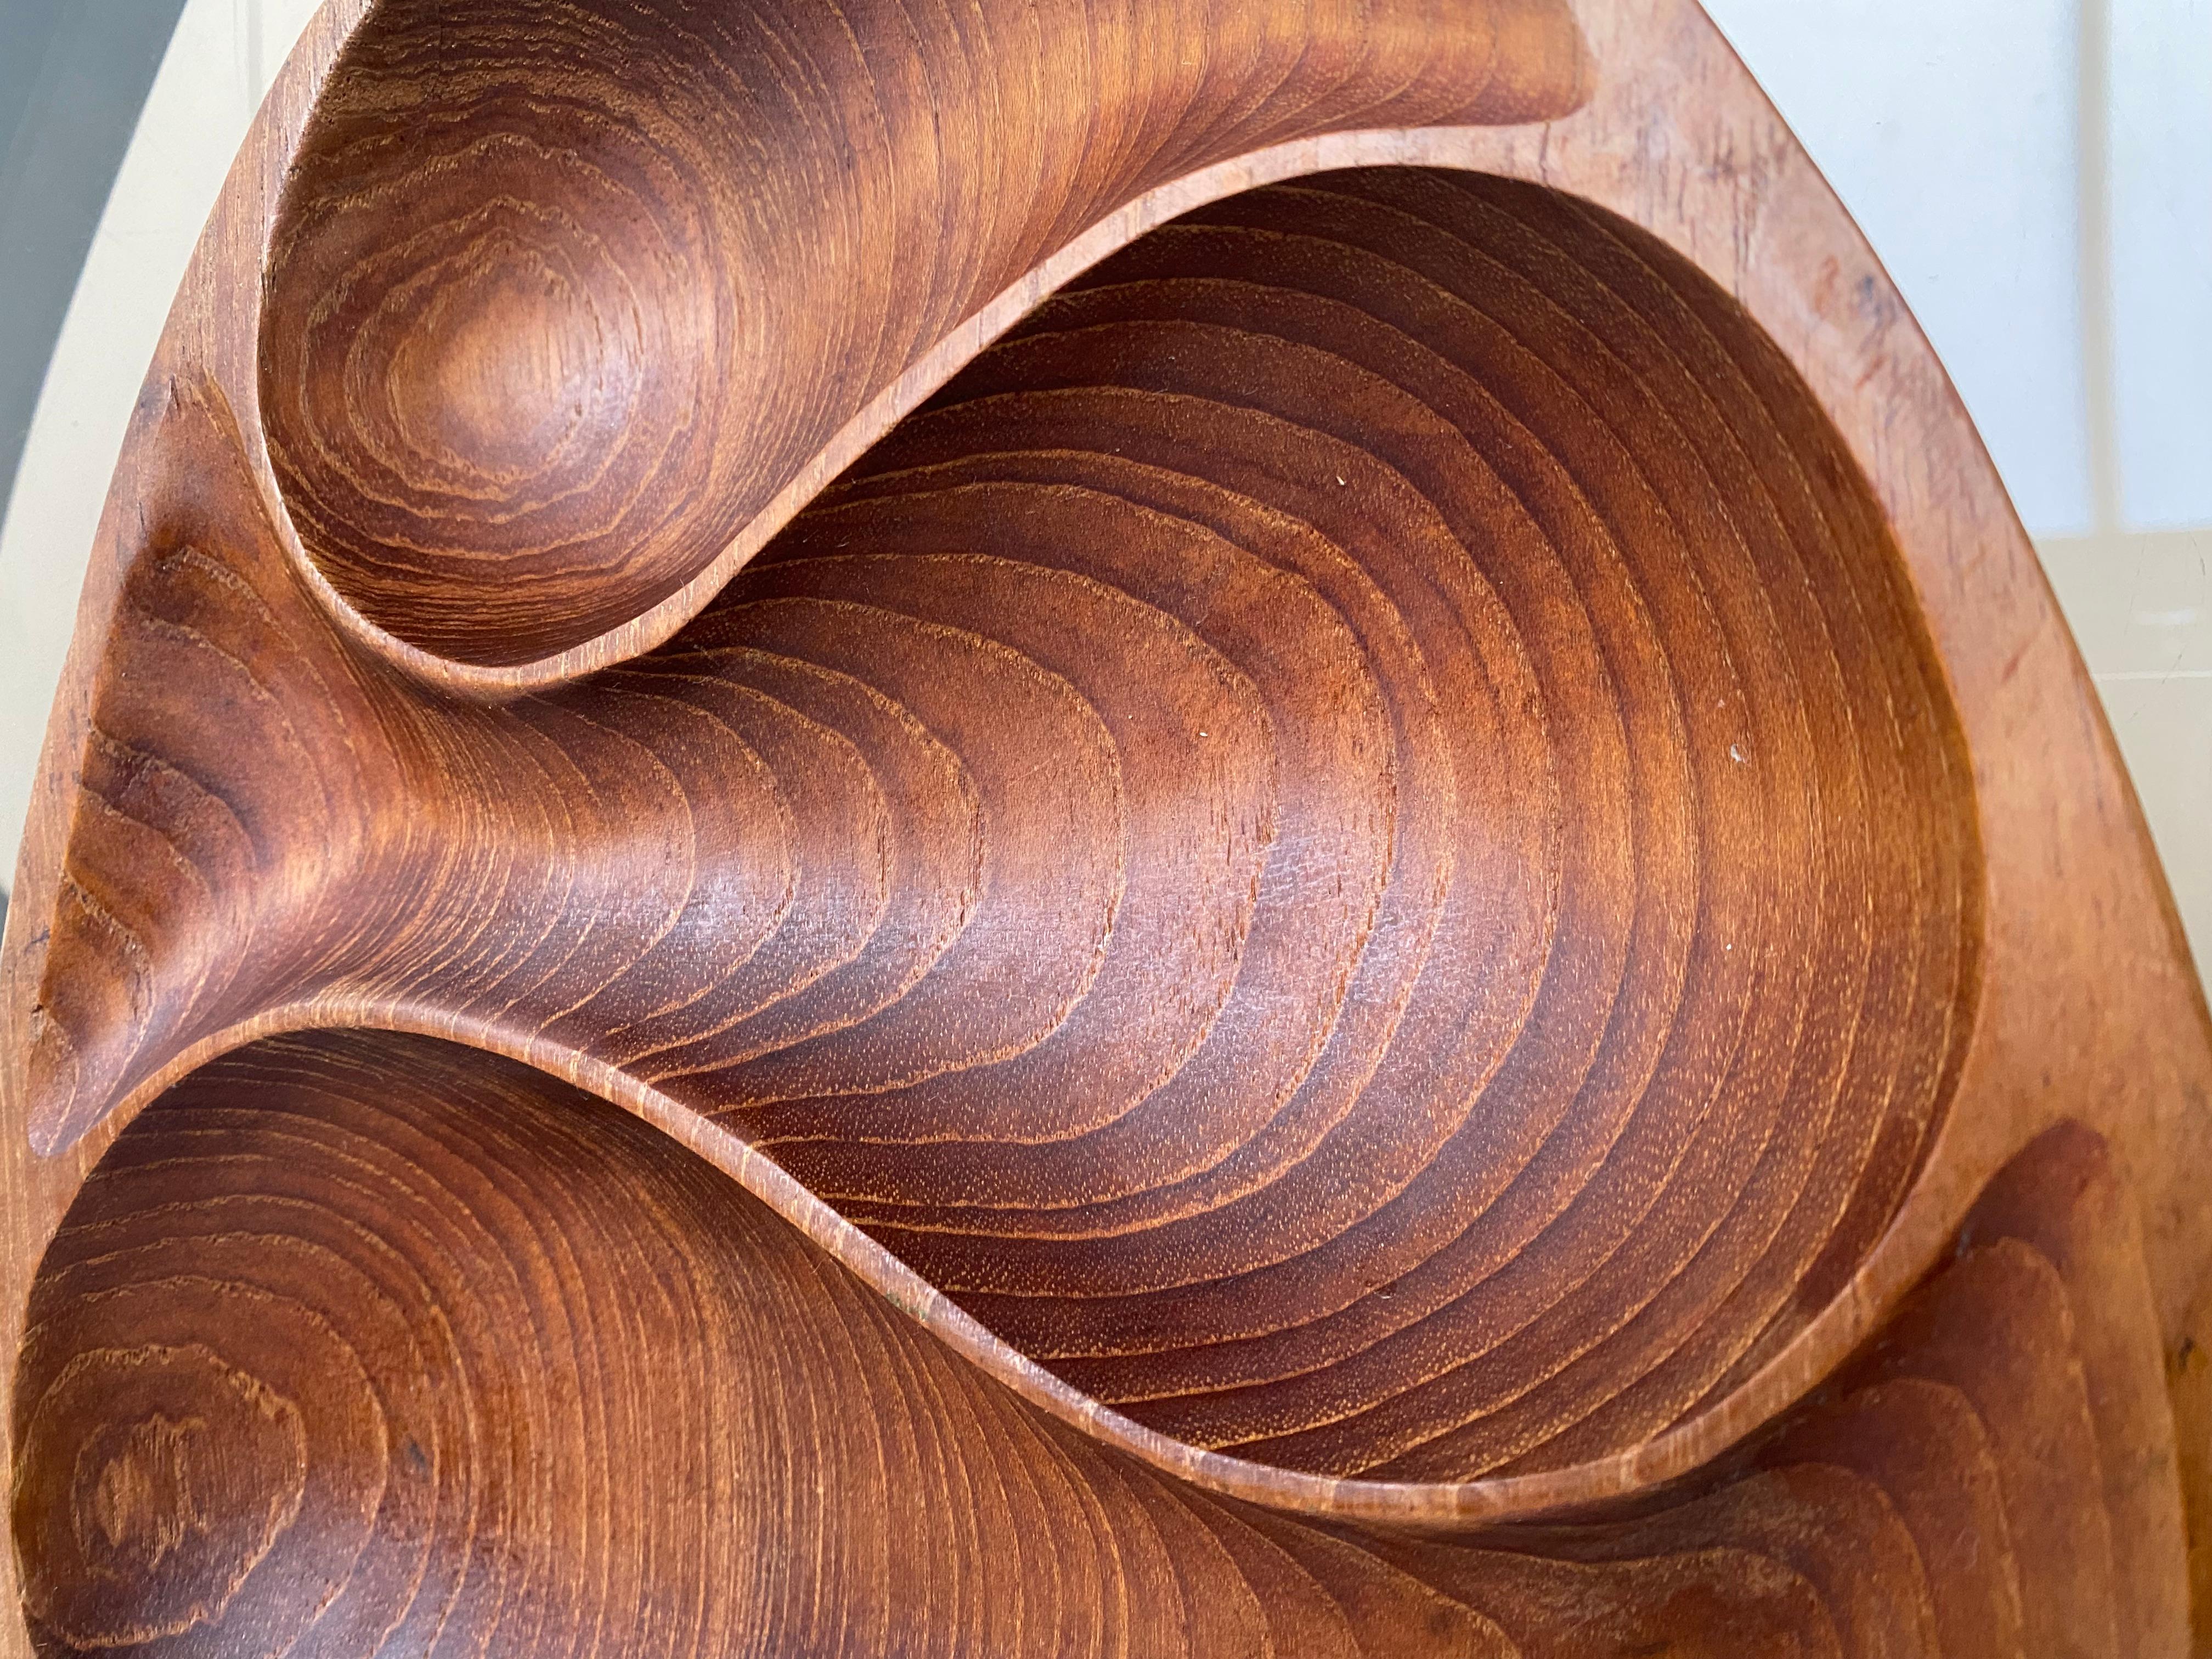 Carved Teak Danish Serving Dish by Laur Jensen for Odense 1960's

Beautiful organic design and a centrepiece on your 'party' table filled with snacks 

Free shipping worldwide!
